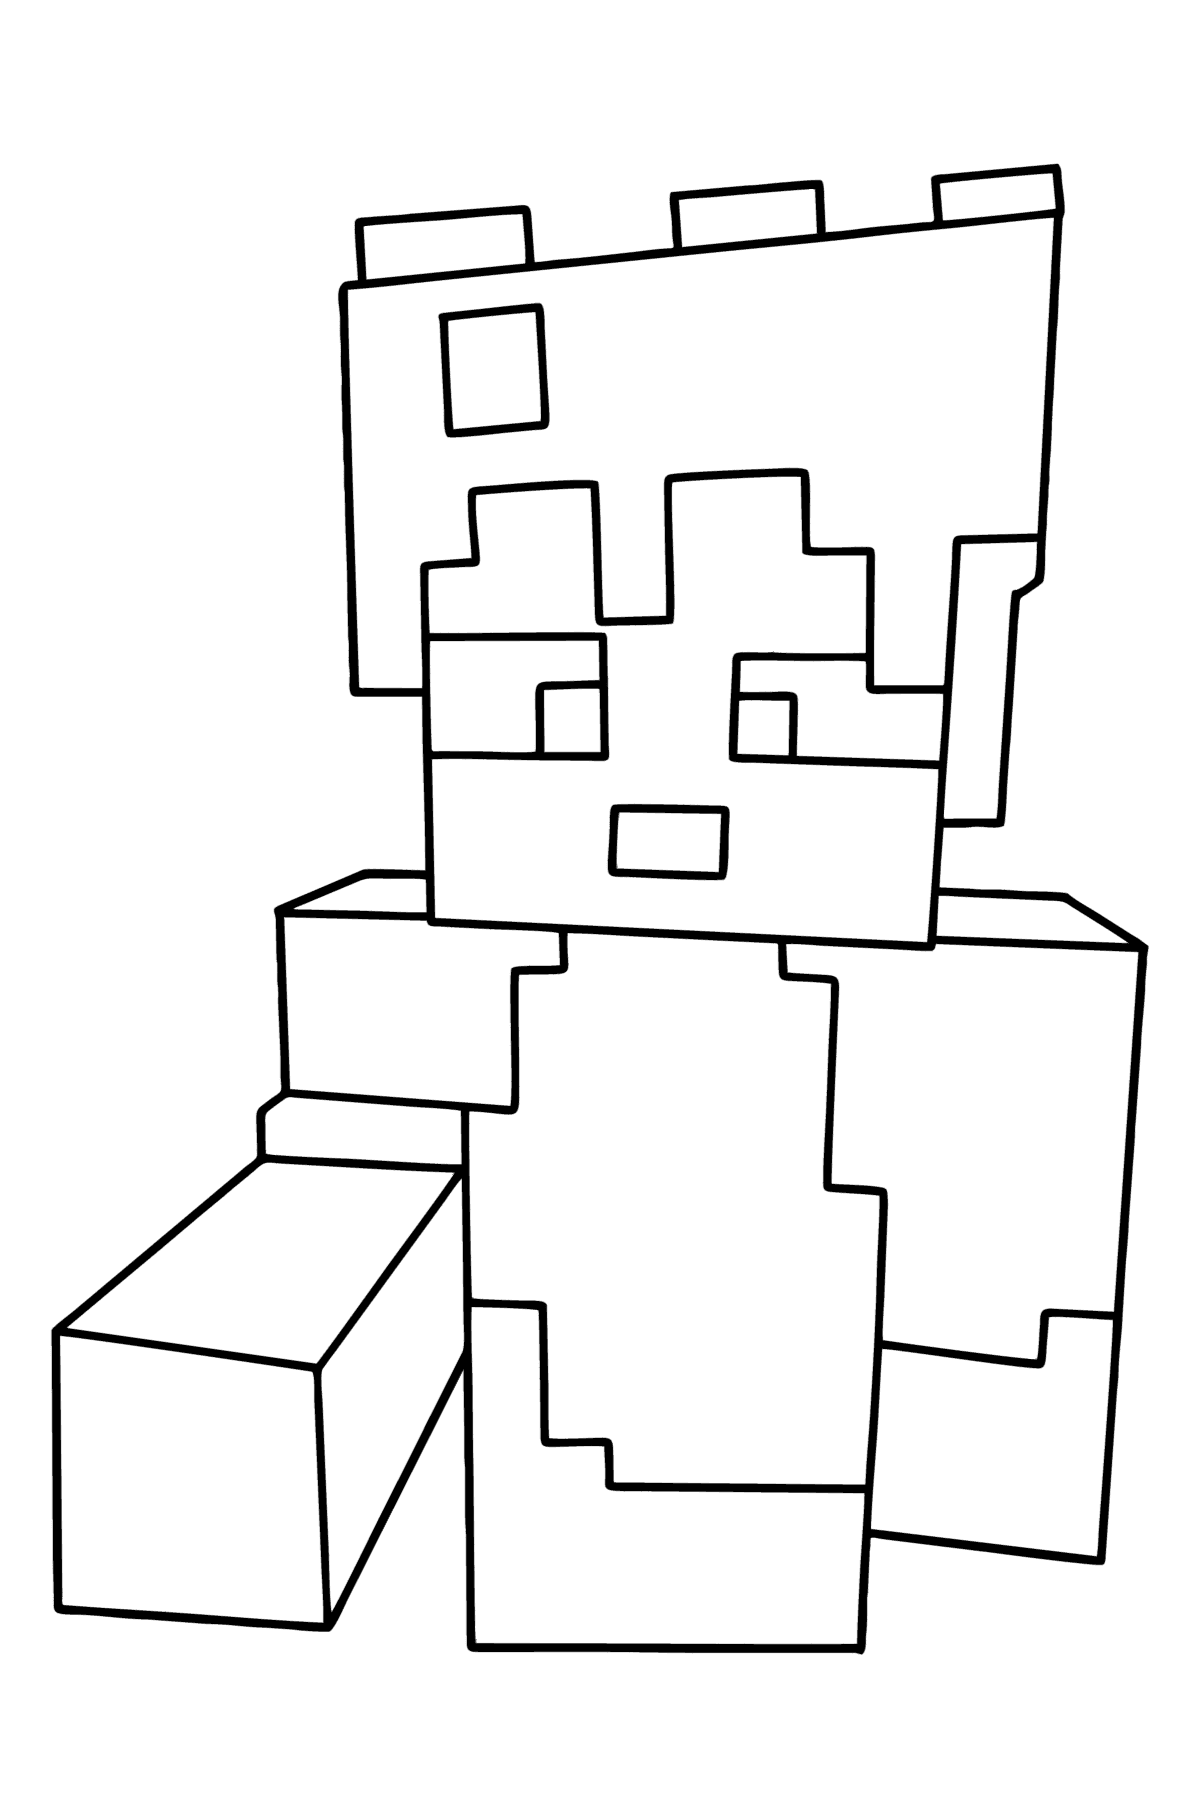 Minecraft Stampy coloring page - Coloring Pages for Kids